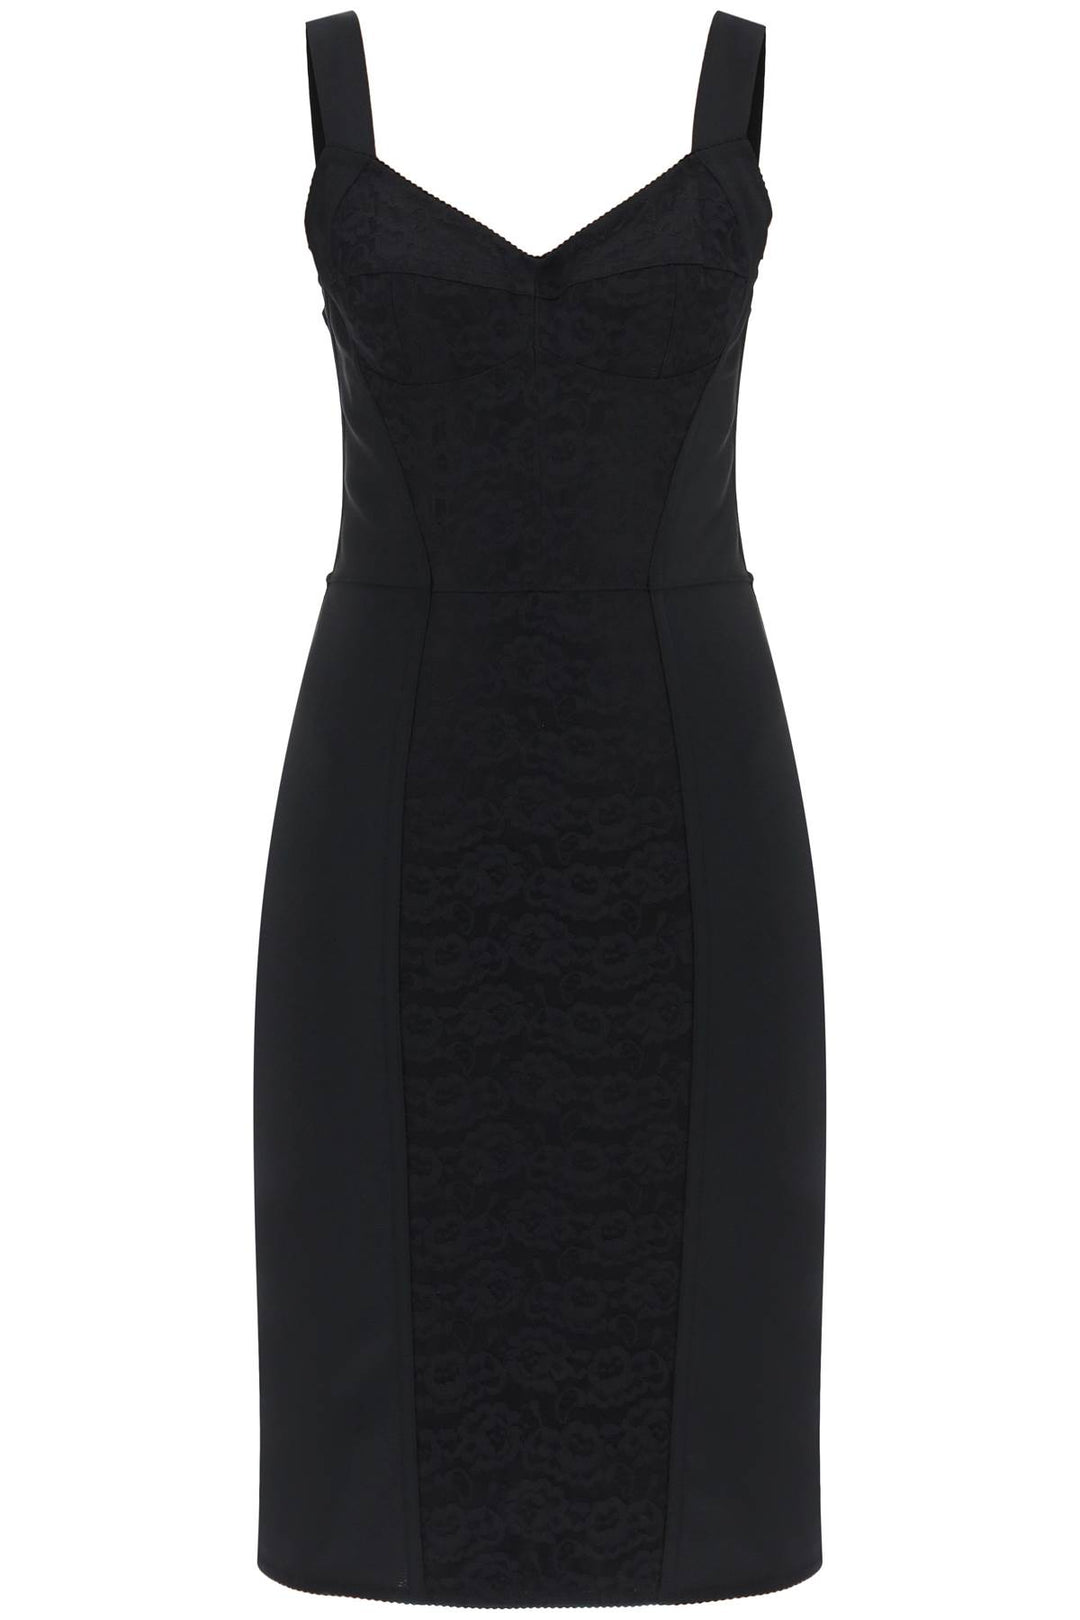 Dolce & Gabbana Bustier Dress With Lace Insert   Nero